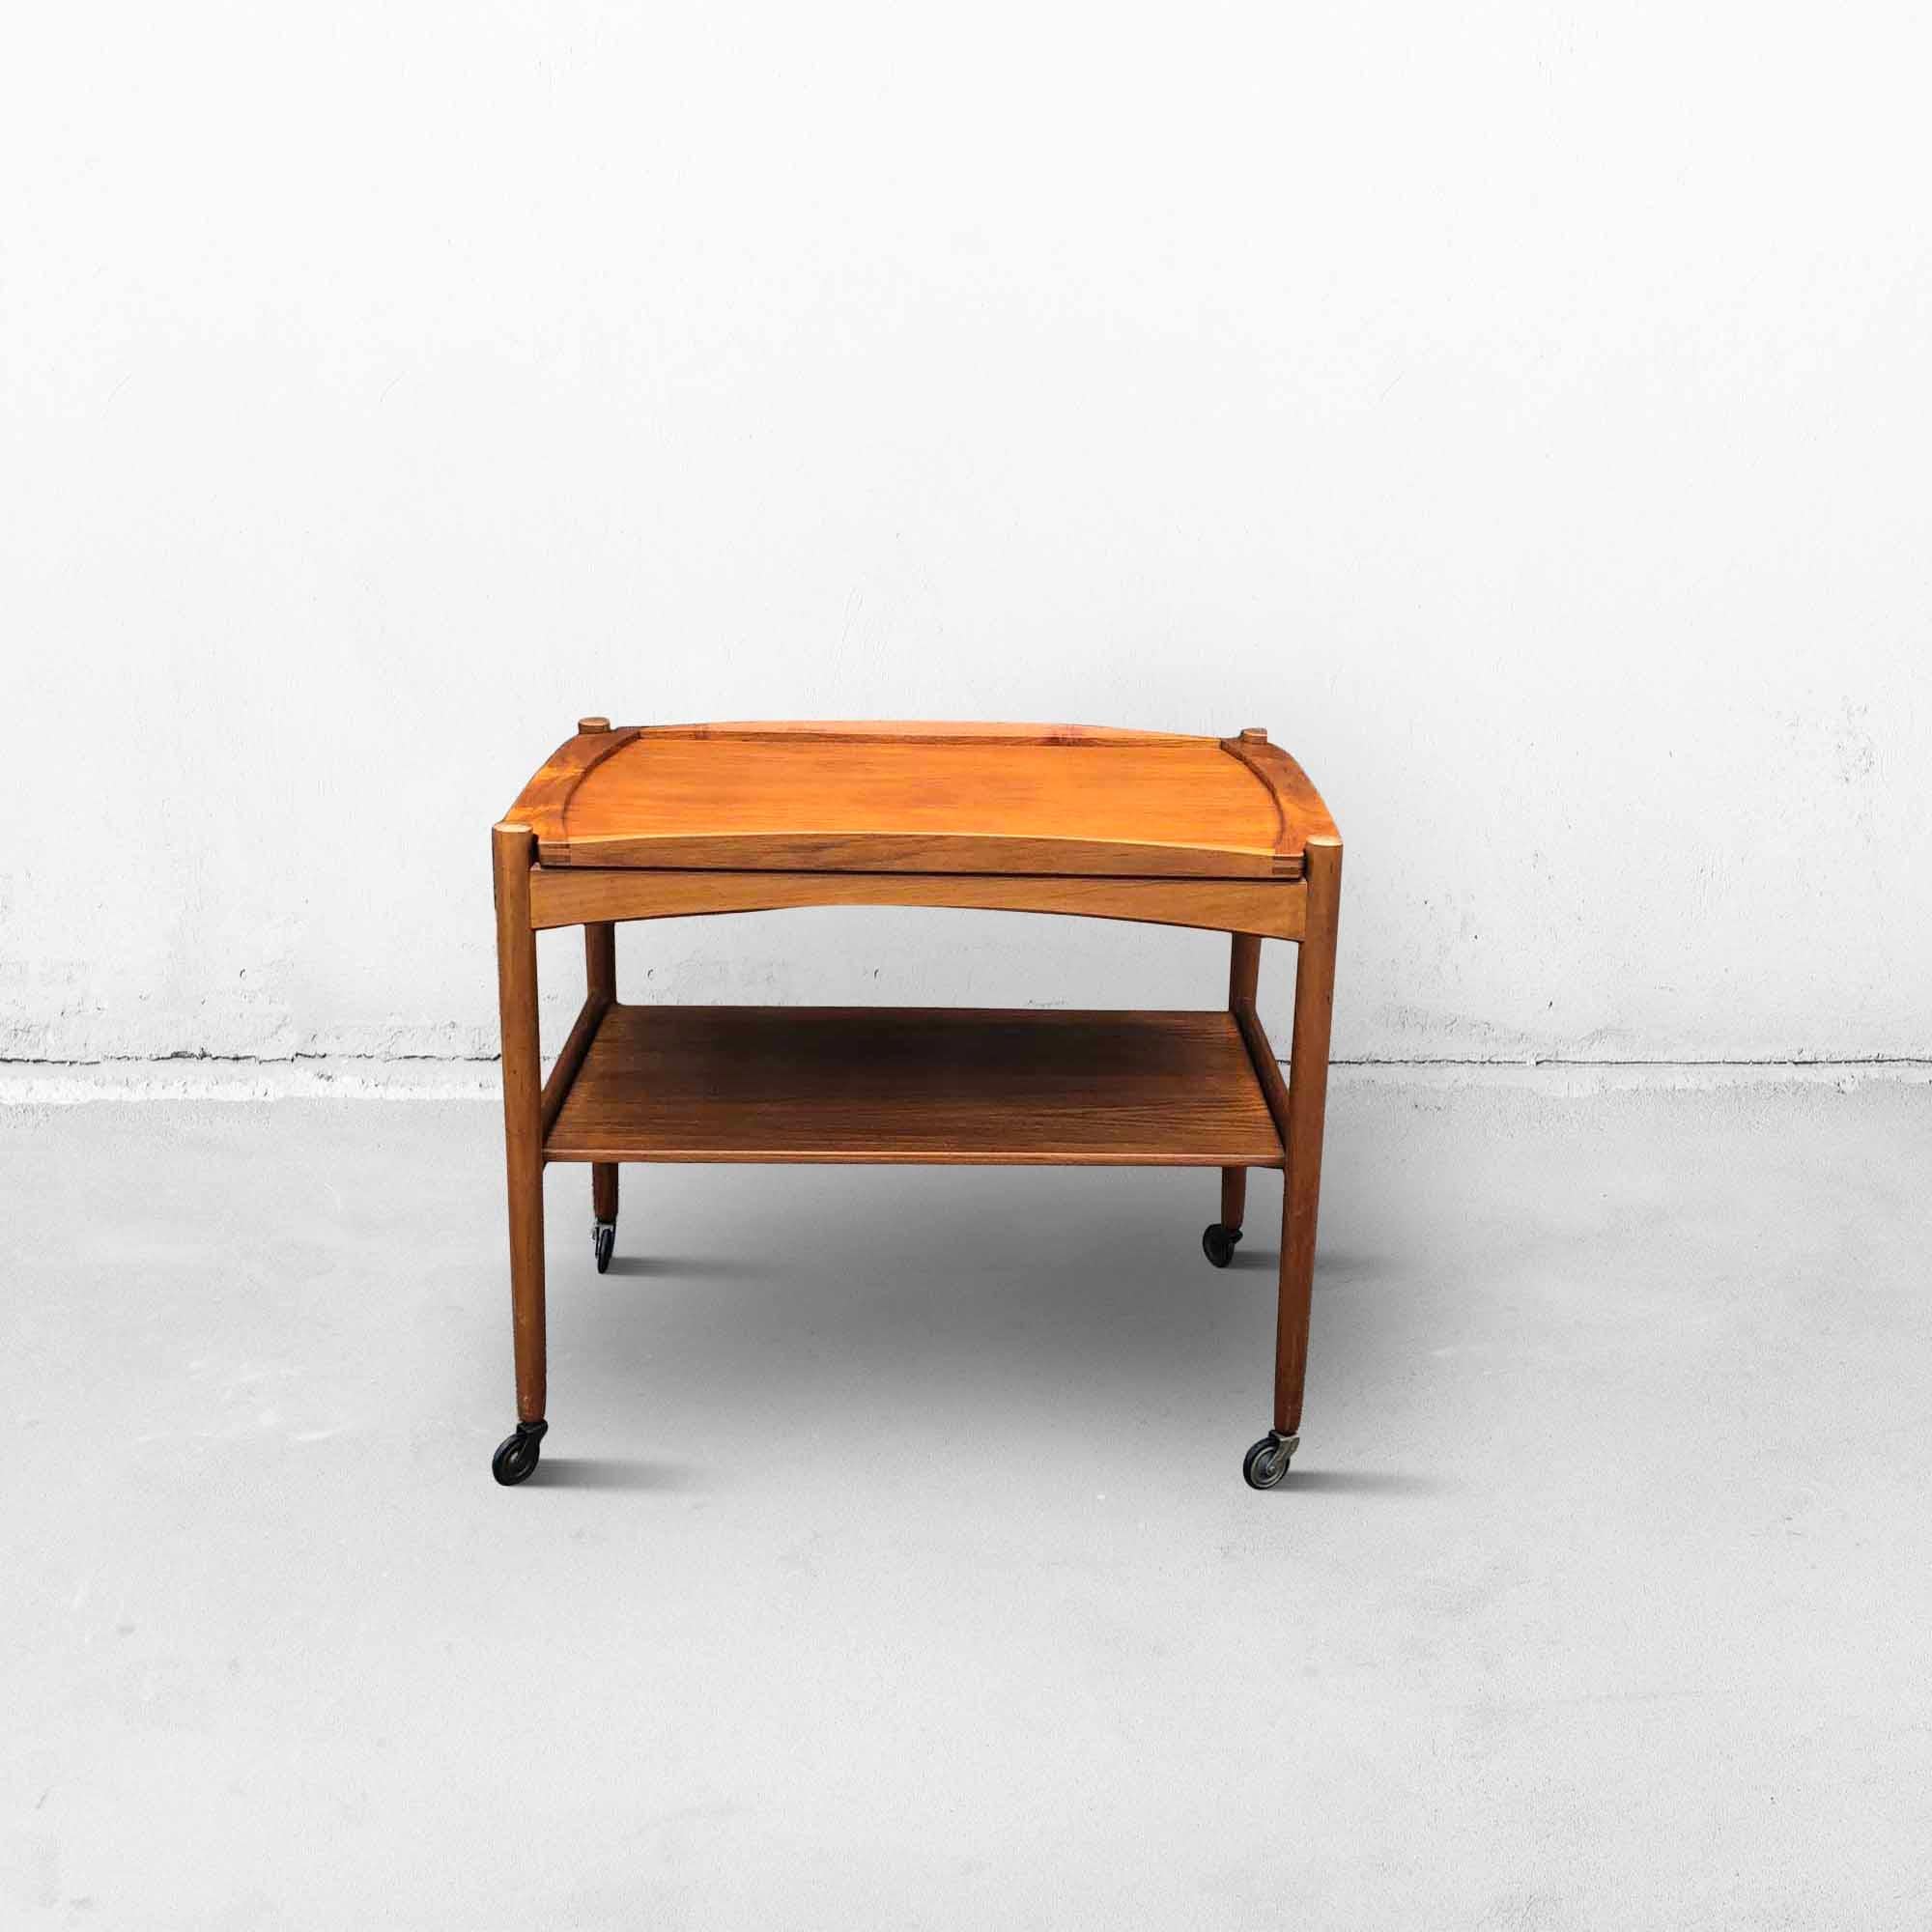 Danish serving trolley or table in teak designed by Poul Hundevad from the 1960s. This bar cart is in two levels, the top level of which is a removable tray. The wheels are in original condition and still run smoothly. This bar trolley is very